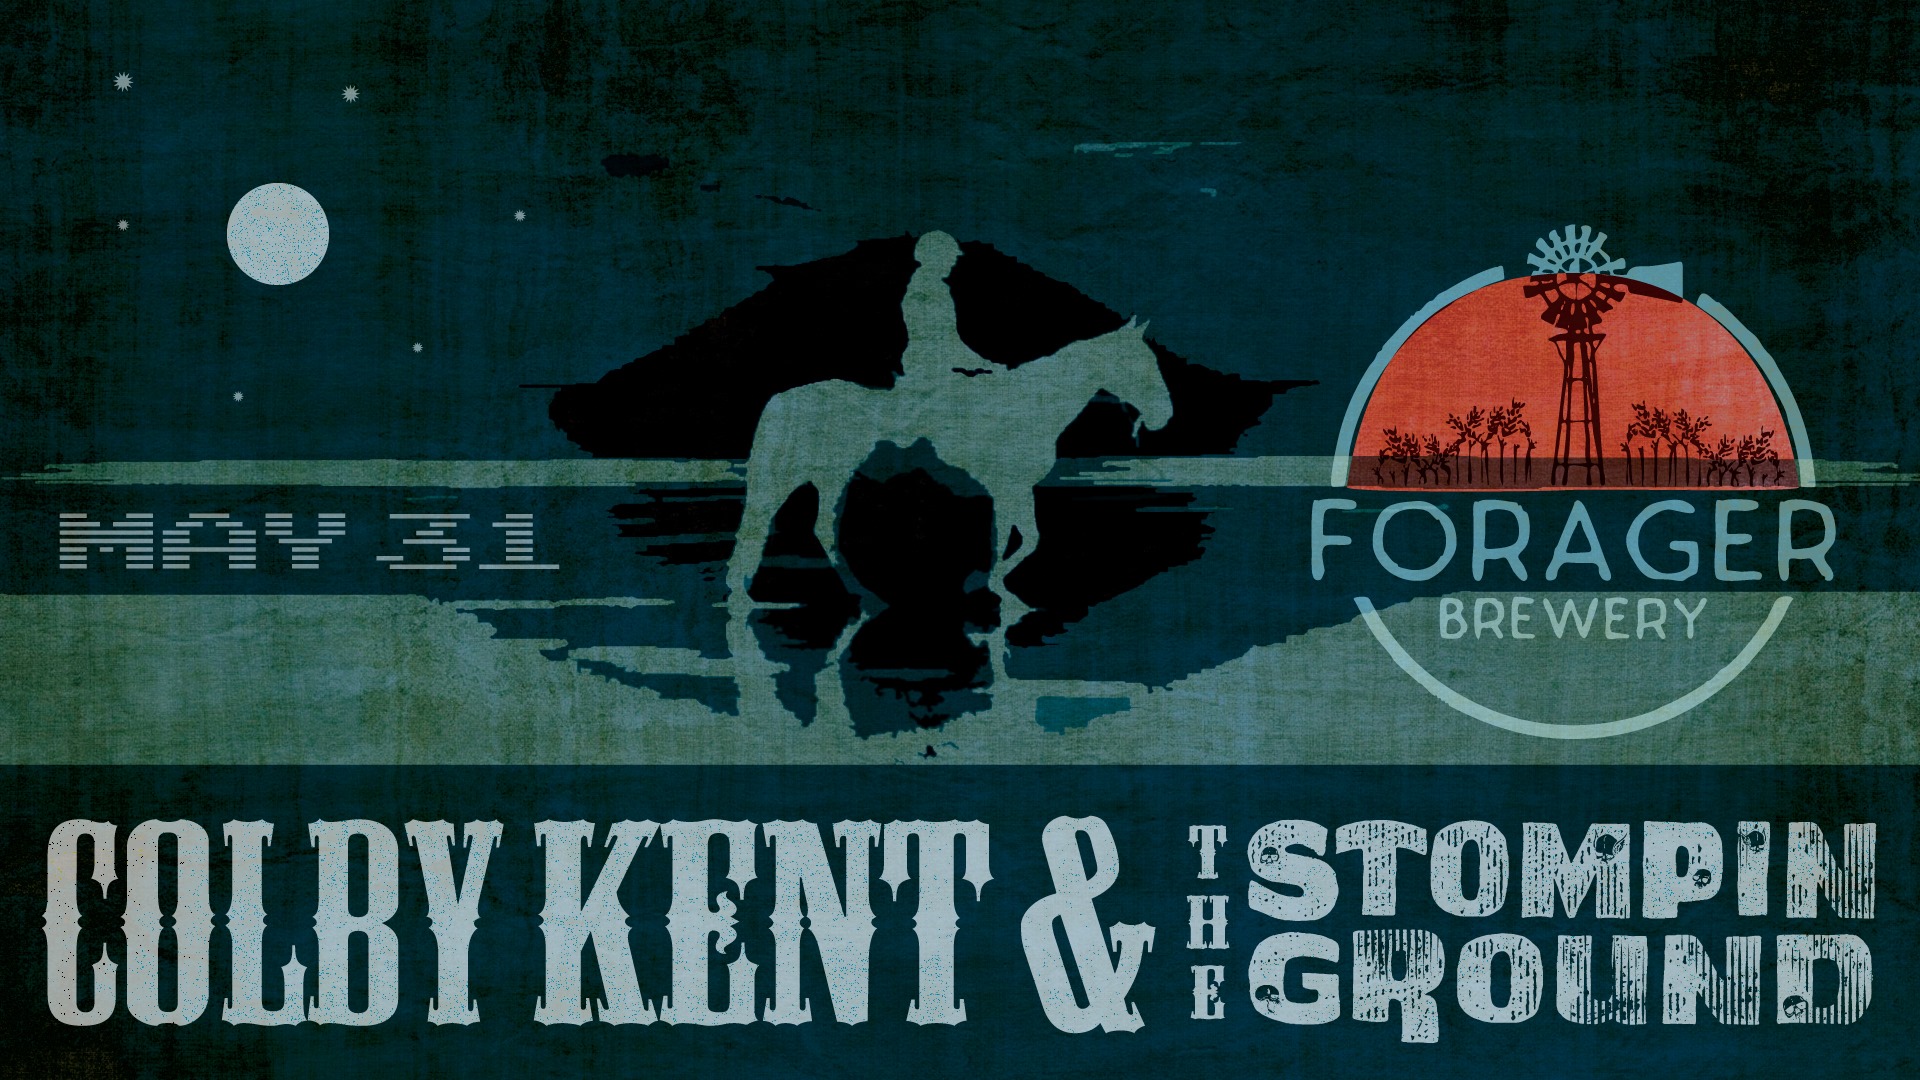 Colby Kent & The Stompin' Ground Forager Brewery